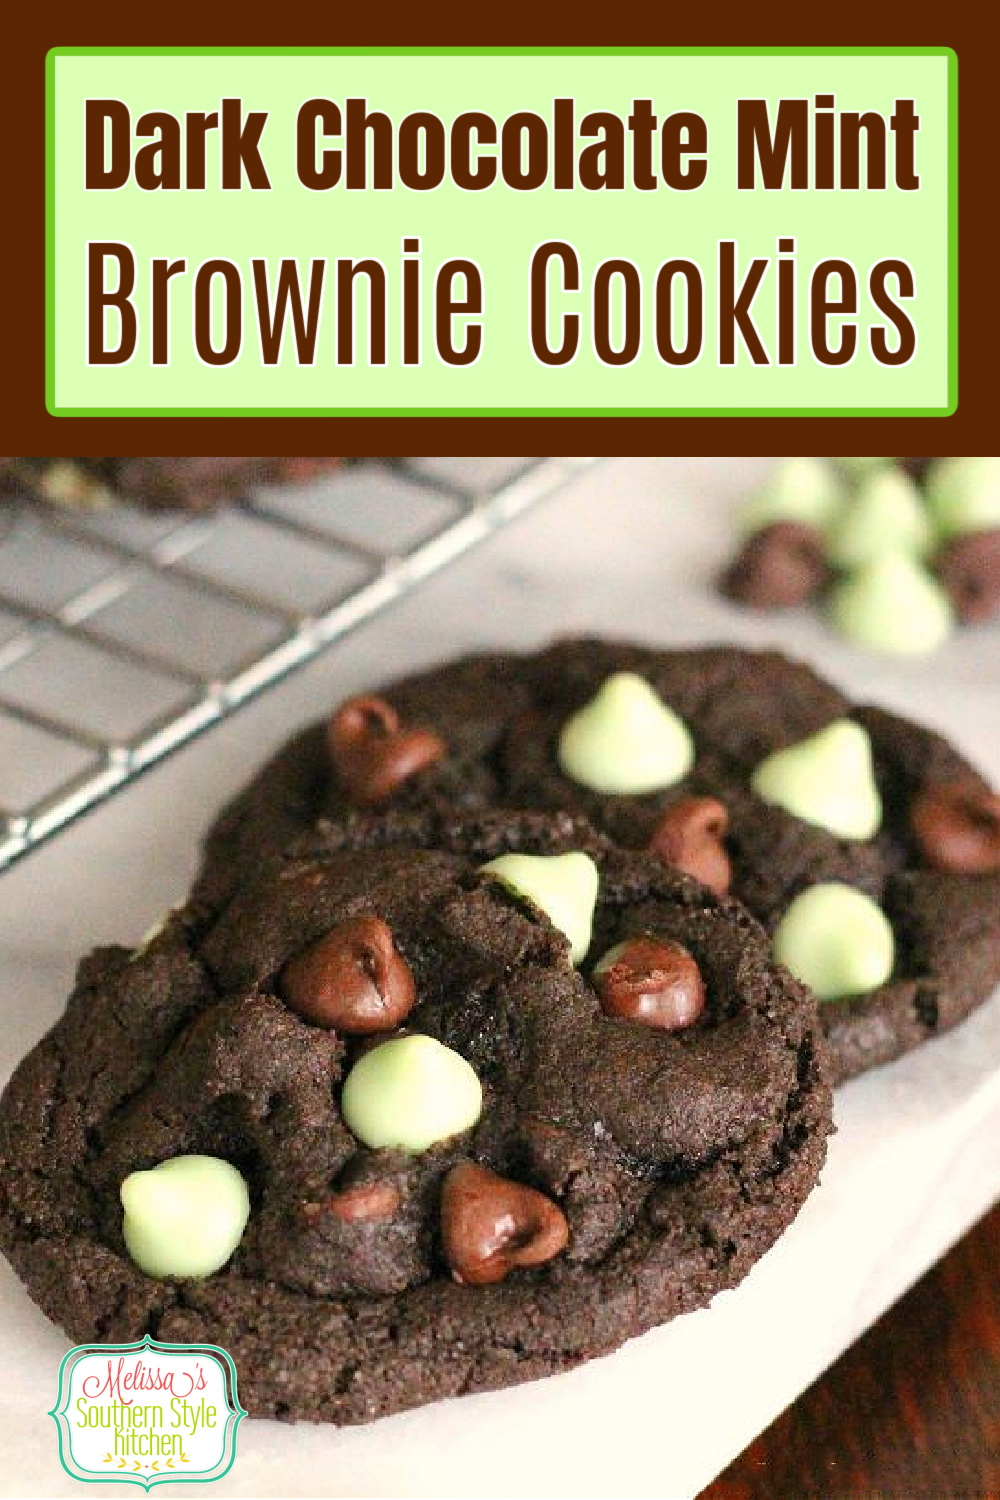 These rich and fudgy Dark Chocolate Mint Brownie Cookies feature a fusion of flavors that makes them the best of both worlds. #brownies #browniecookies #mint #chocolatemint #cookies #cookierecipes #chocolate #chocolatecookies #chocolatechipcookies #desserts #dessertfoodrecipes #christmascookies #holidaybaking #southernfood #southernrecipes via @melissasssk